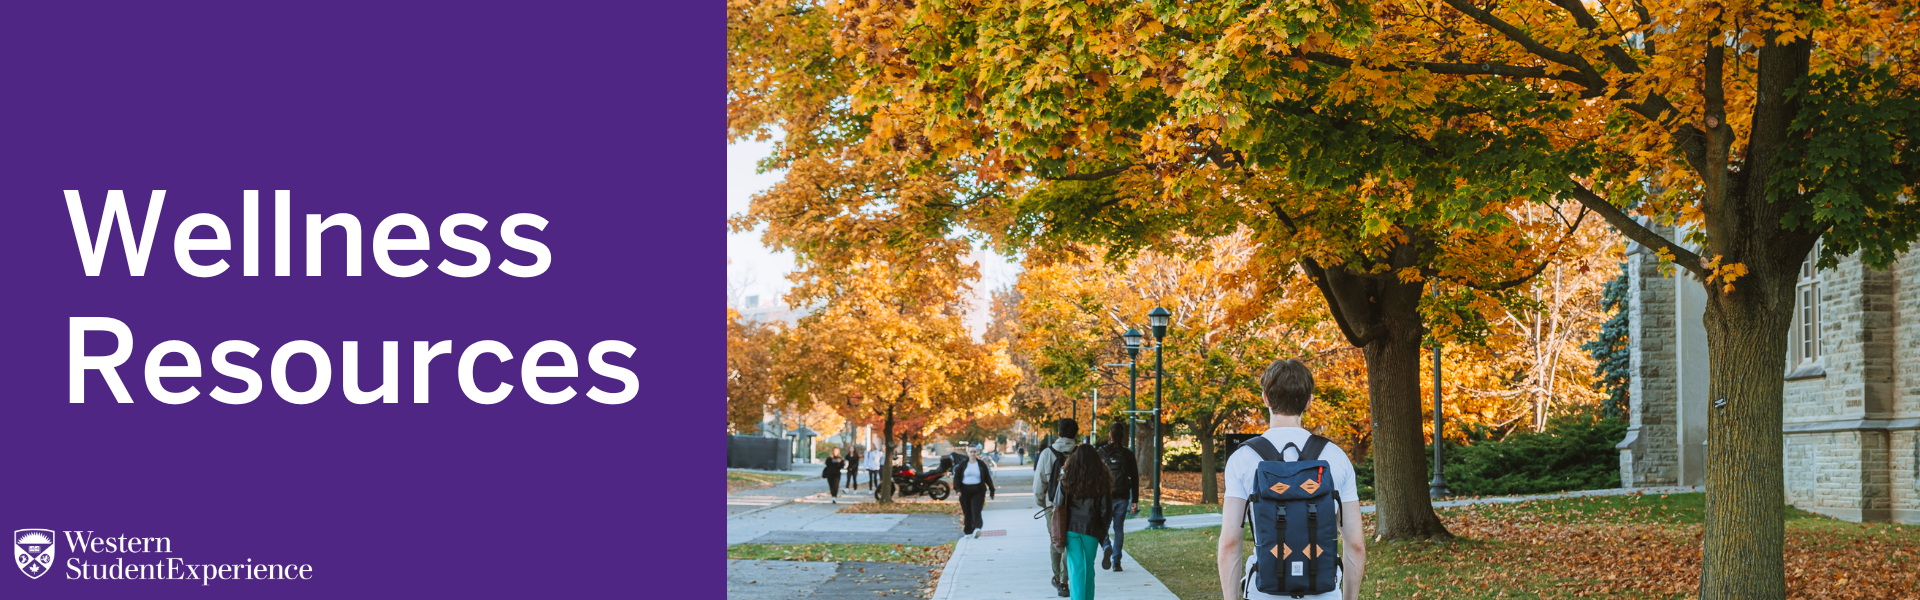 Wellness Resources title with picture of students walking on campus in the fall.